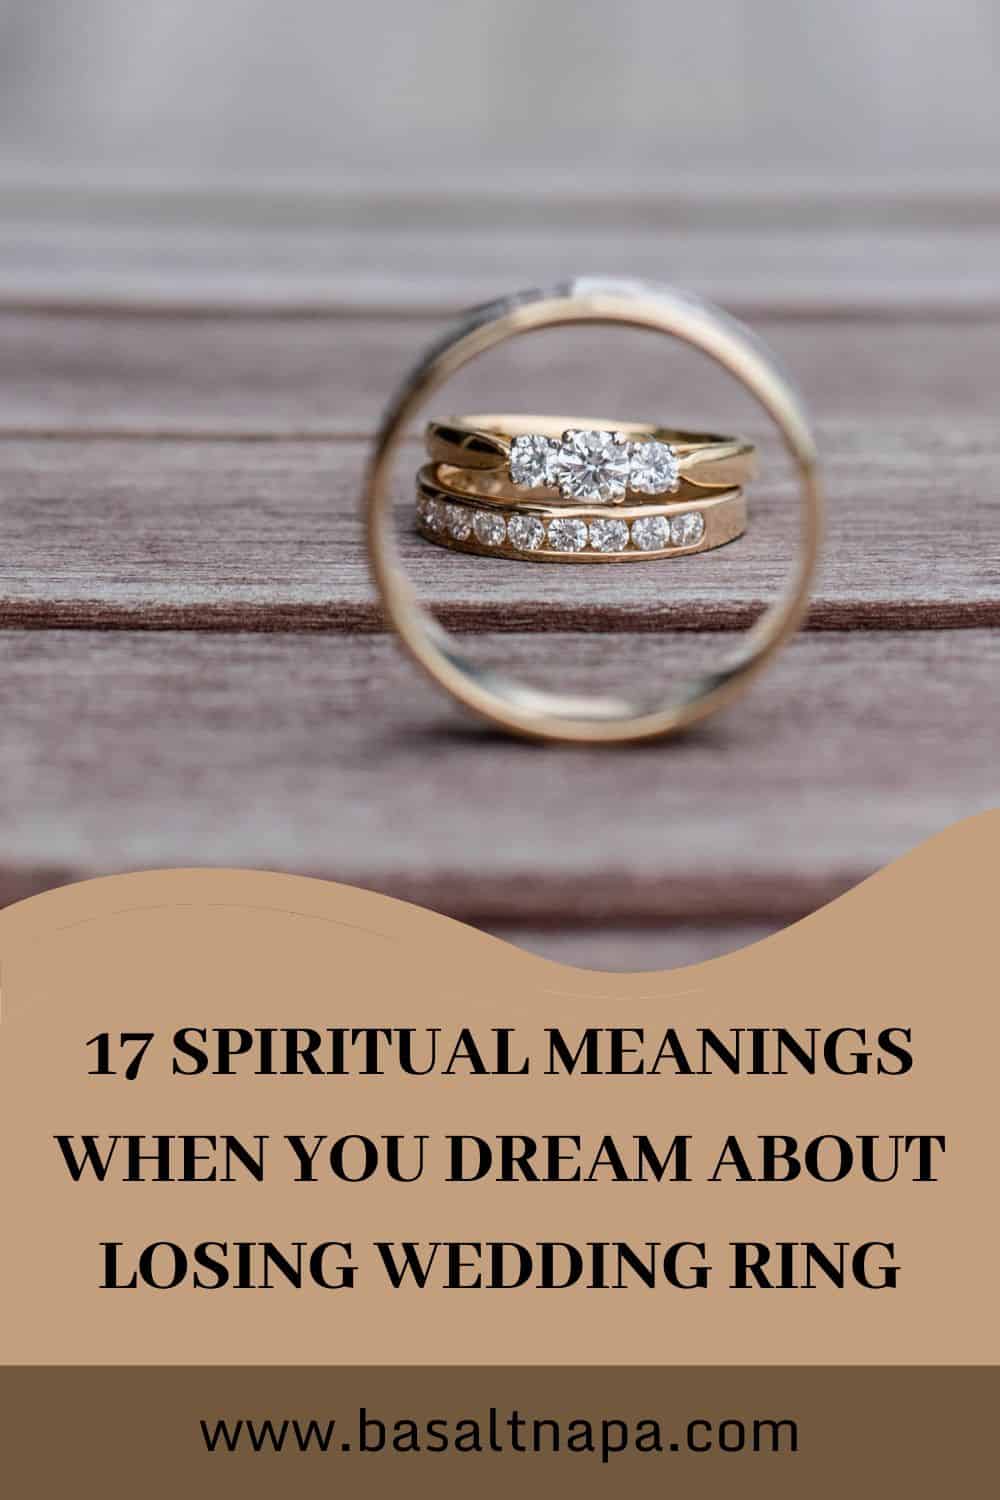 17 Spiritual Meanings When You Dream About Losing Wedding Ring